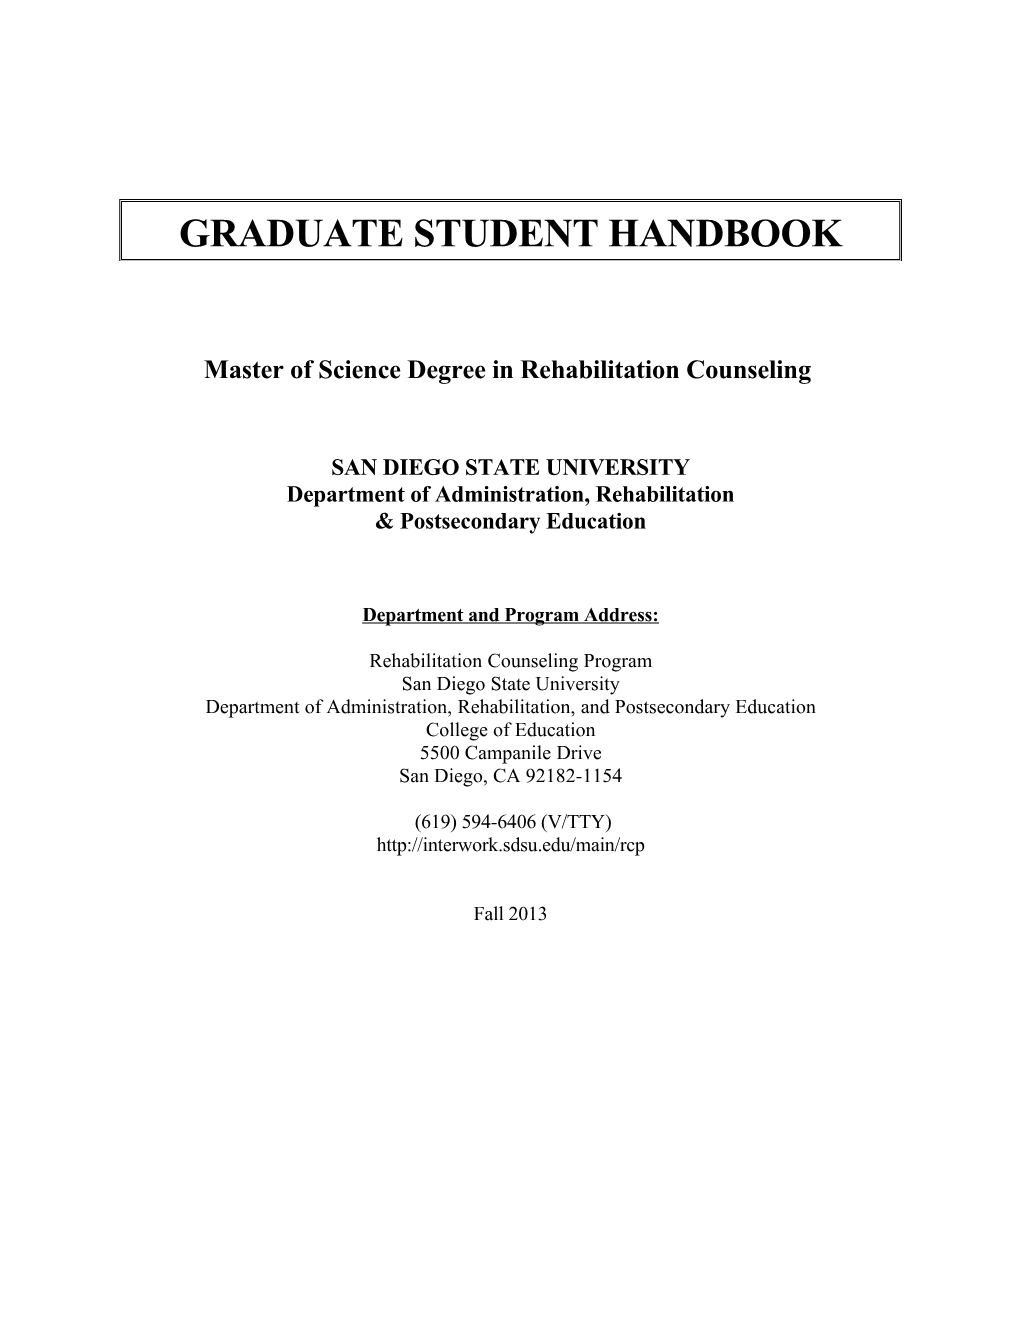 Master of Science Degree in Rehabilitation Counseling